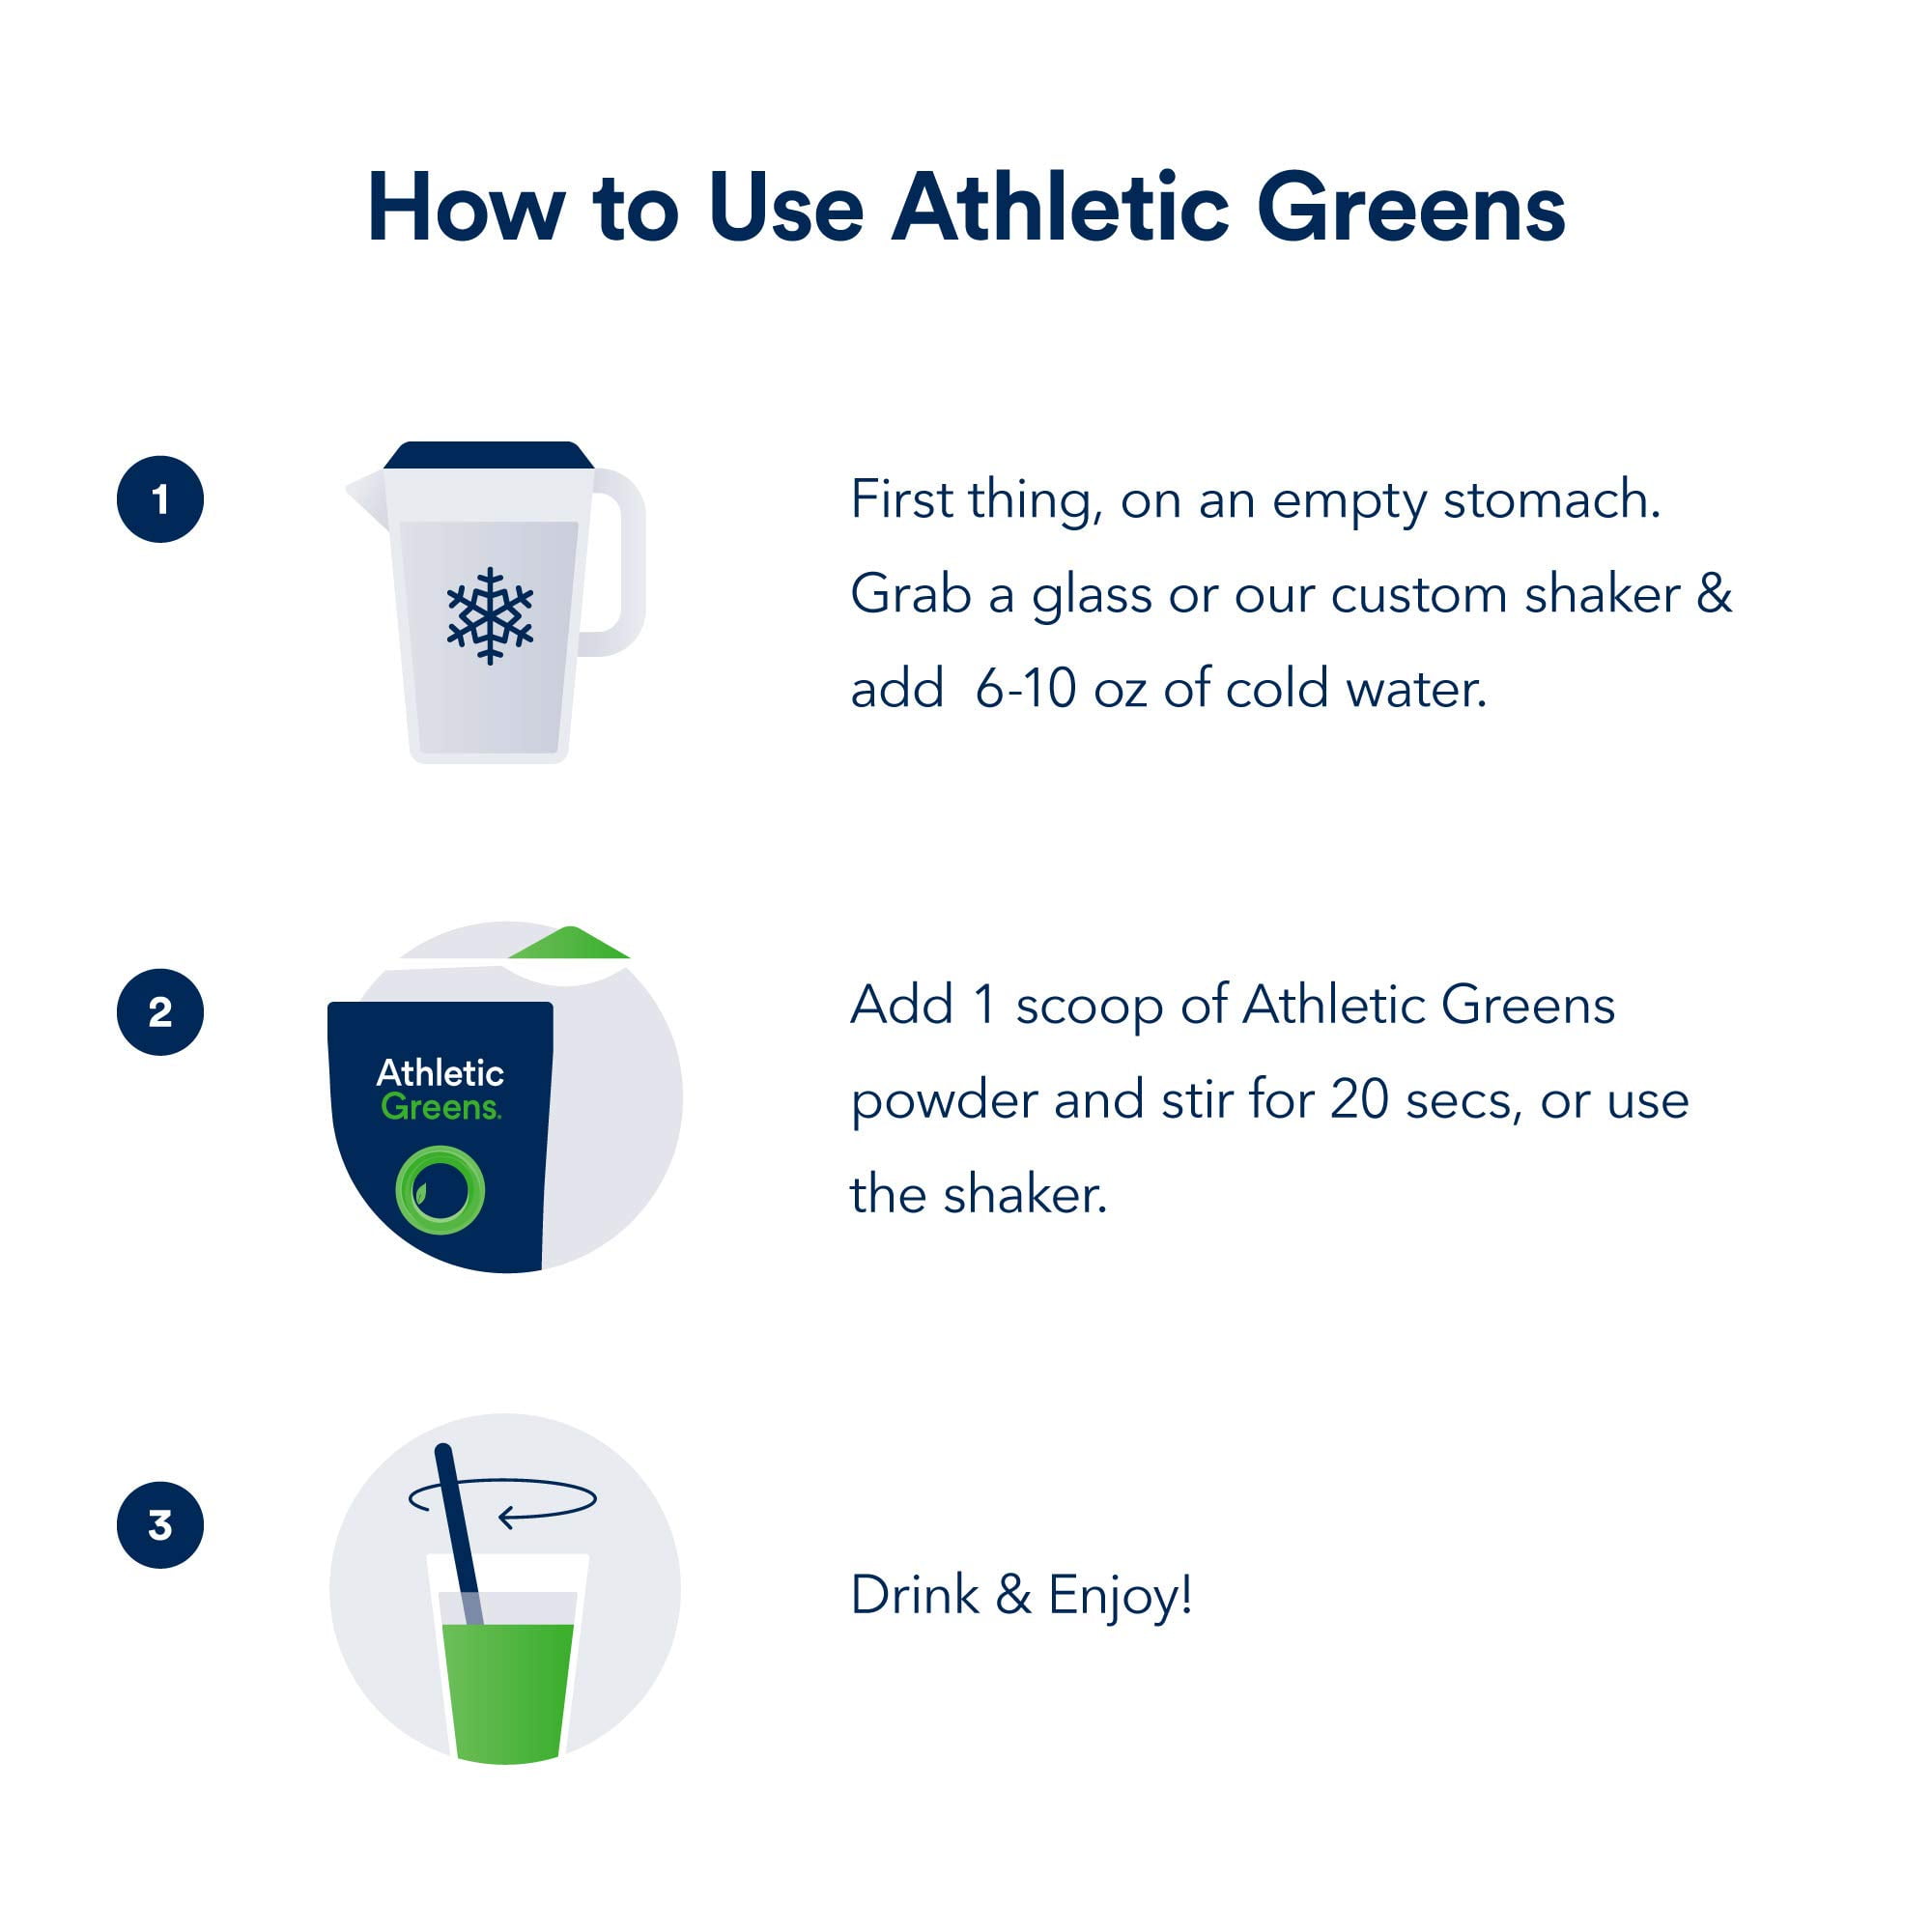  Athletic Greens Ultimate Daily, Whole Food Sourced All